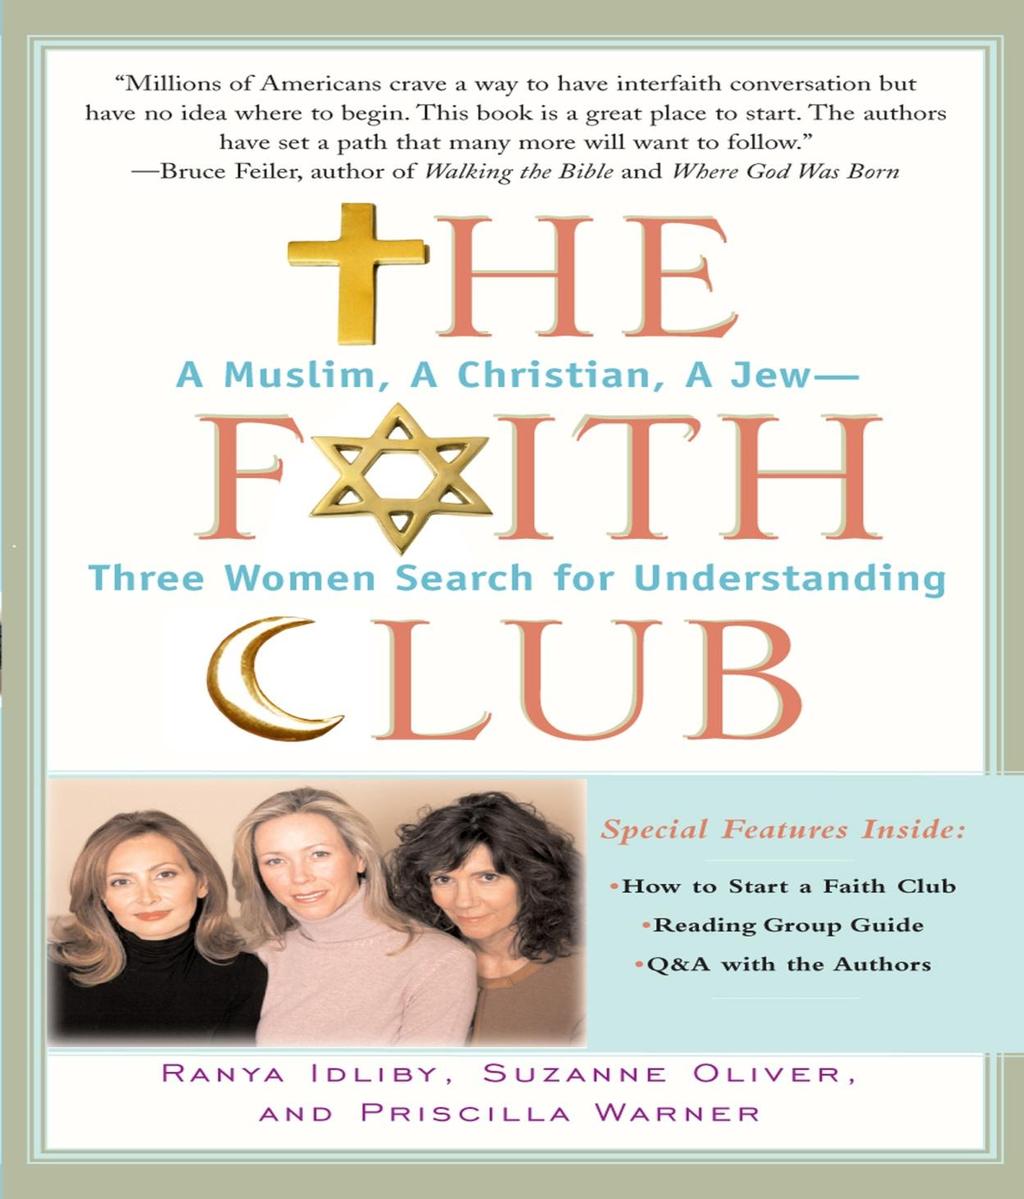 A second book has been added entitled The Faith Club A Muslim, A Christian, A Jew Three women search for understanding by Ranya Idliby, Suzanne Oliver & Priscilla Warner.